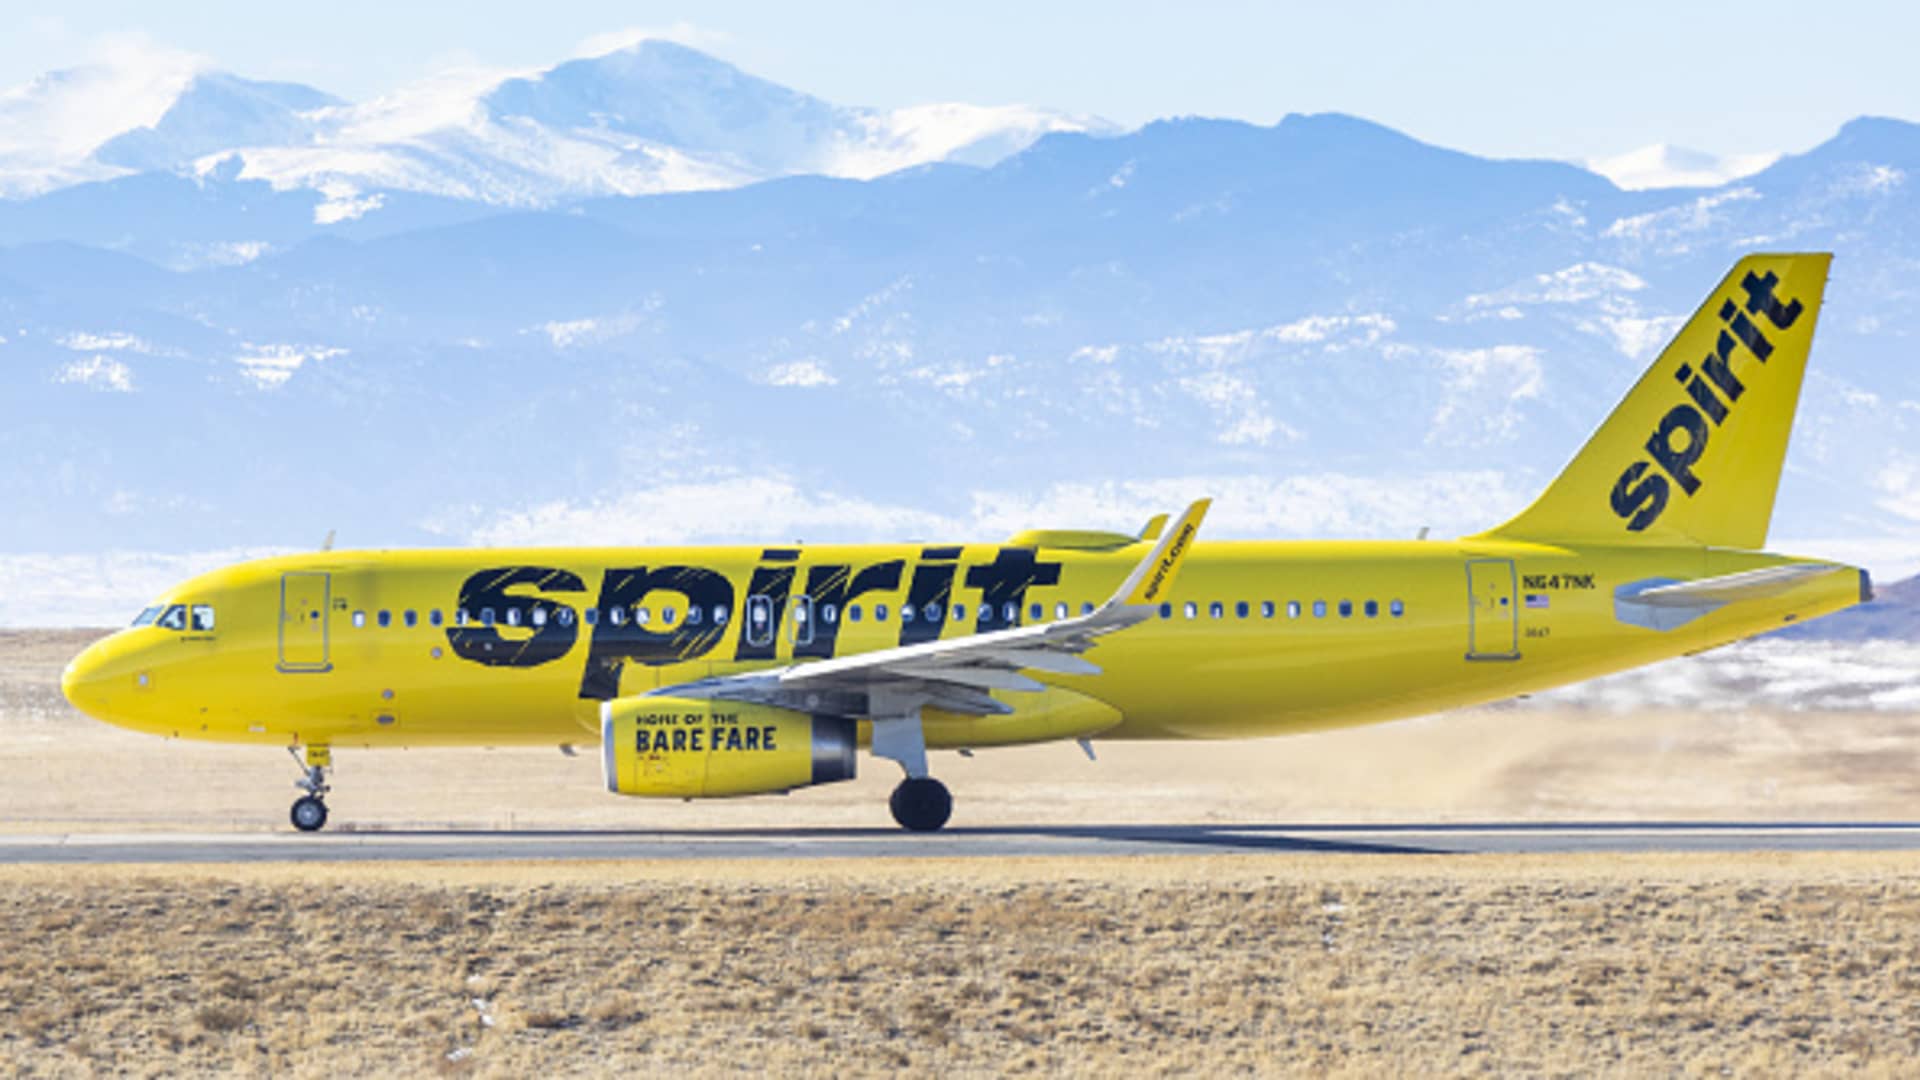 Spirit Airlines shares spike 20% after report says JetBlue made bid